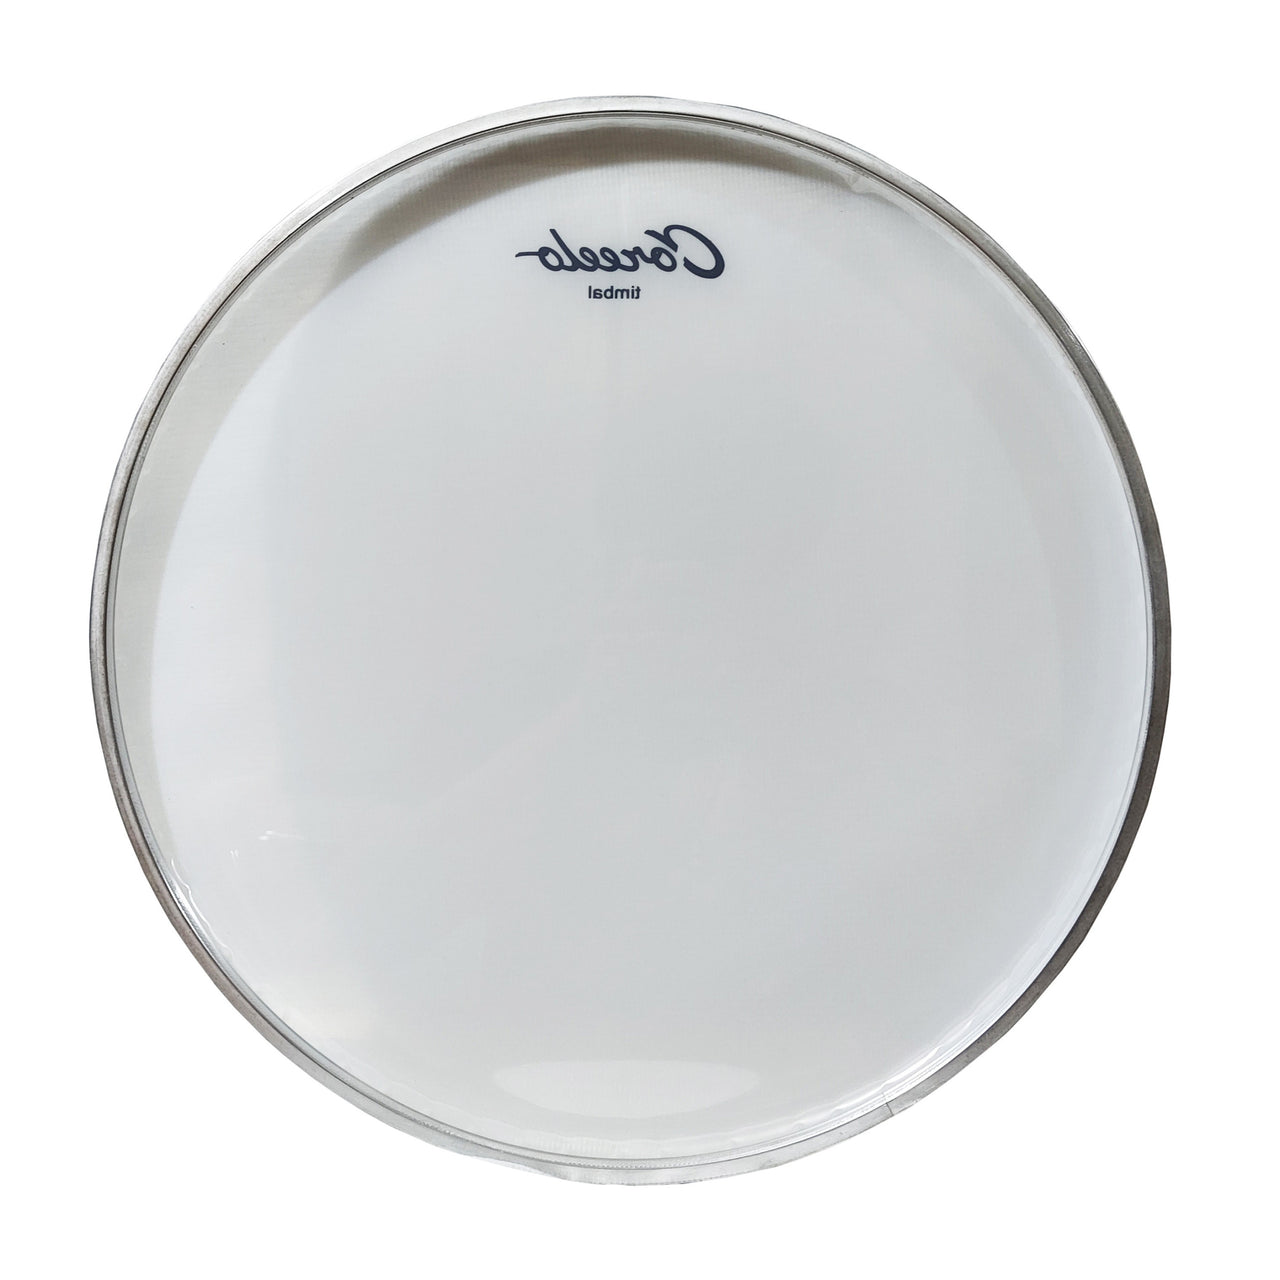 Parche Coreelo 14" P/Timbal, Tim14